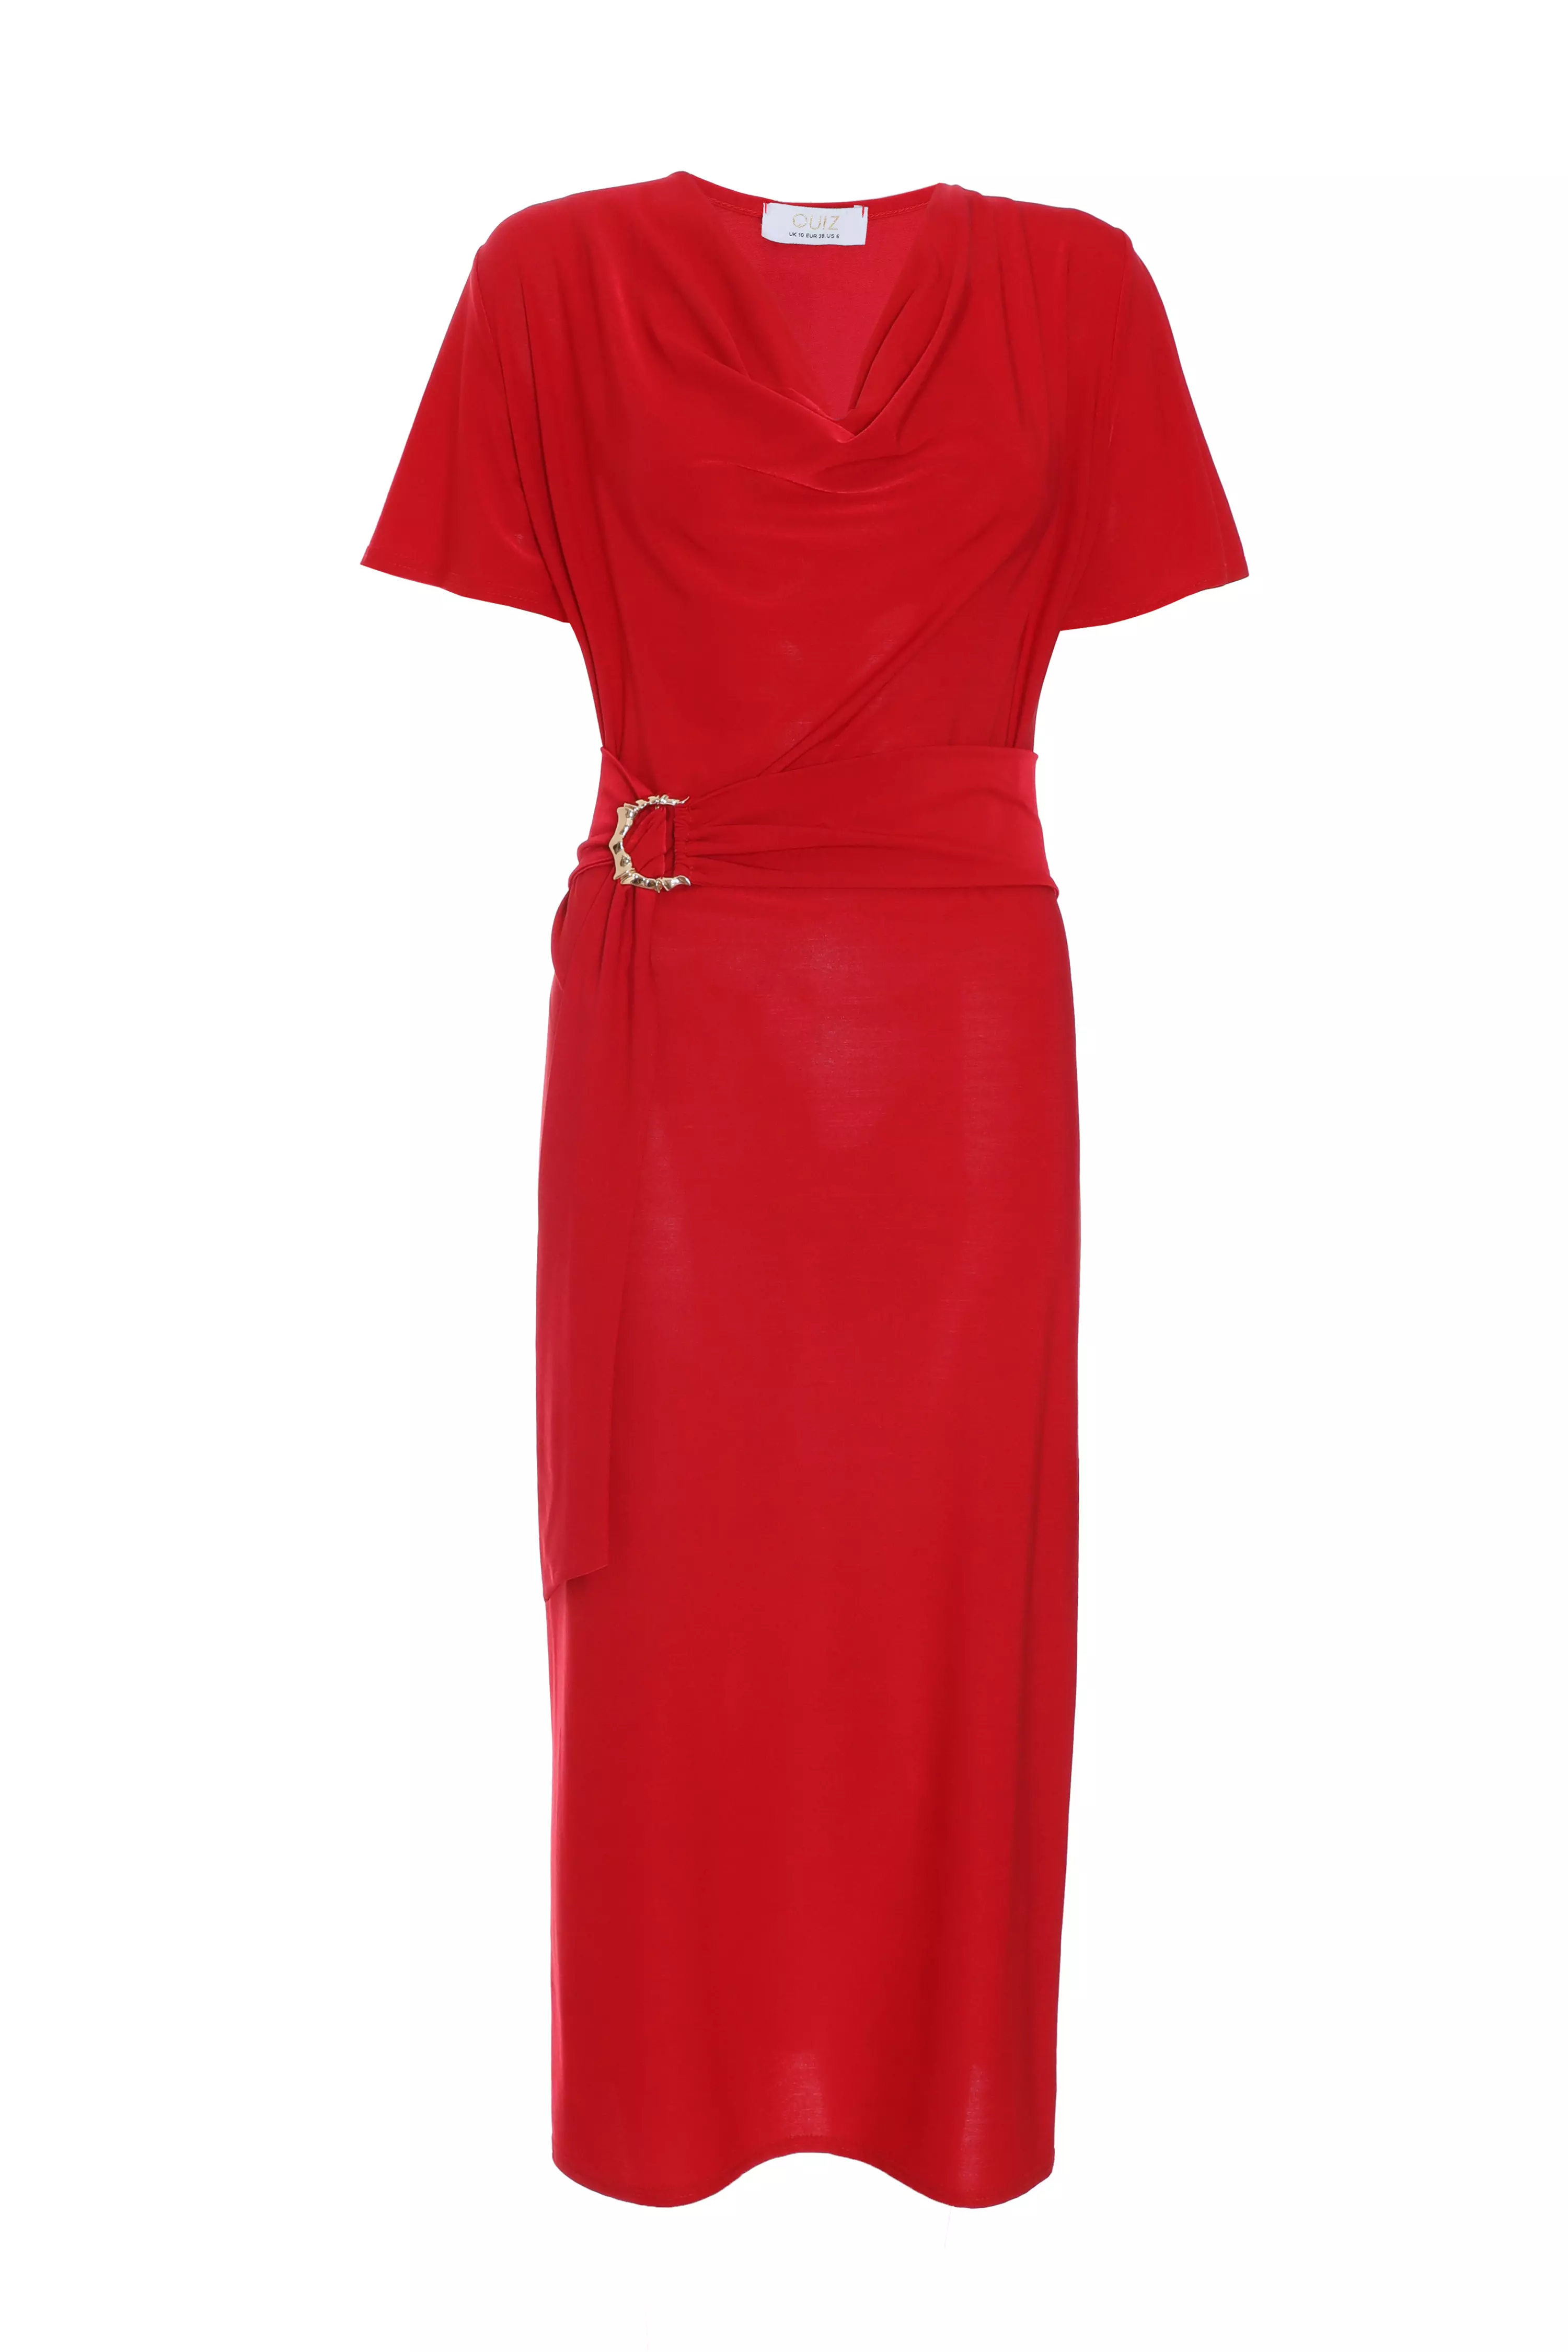 Red Cowl Neck Buckle Midi Dress - QUIZ Clothing